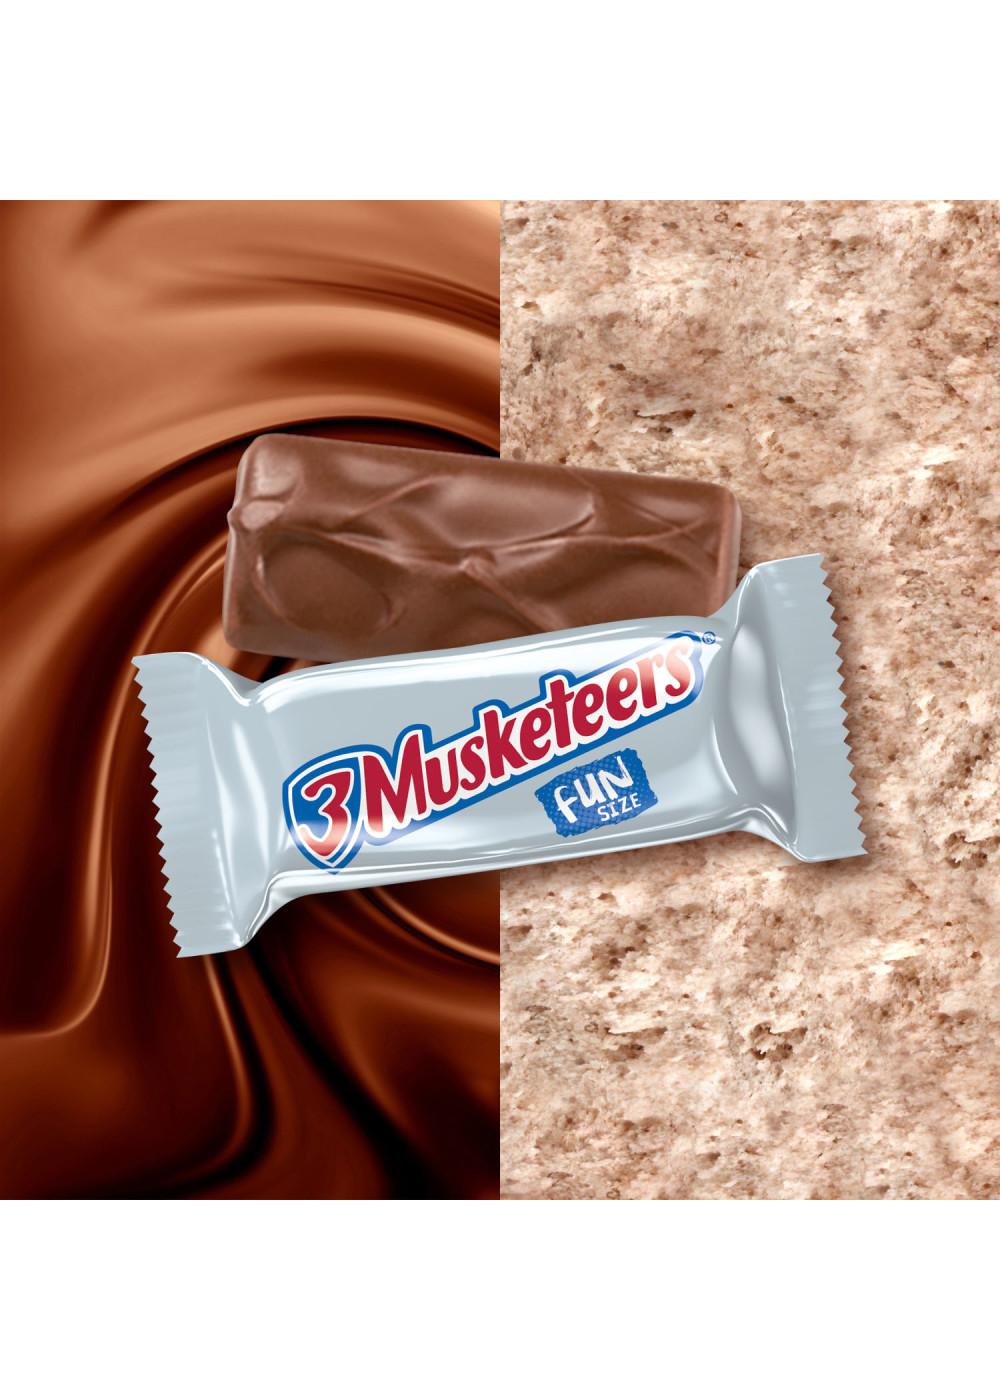 3 Musketeers Fun Size Candy Bars; image 5 of 10